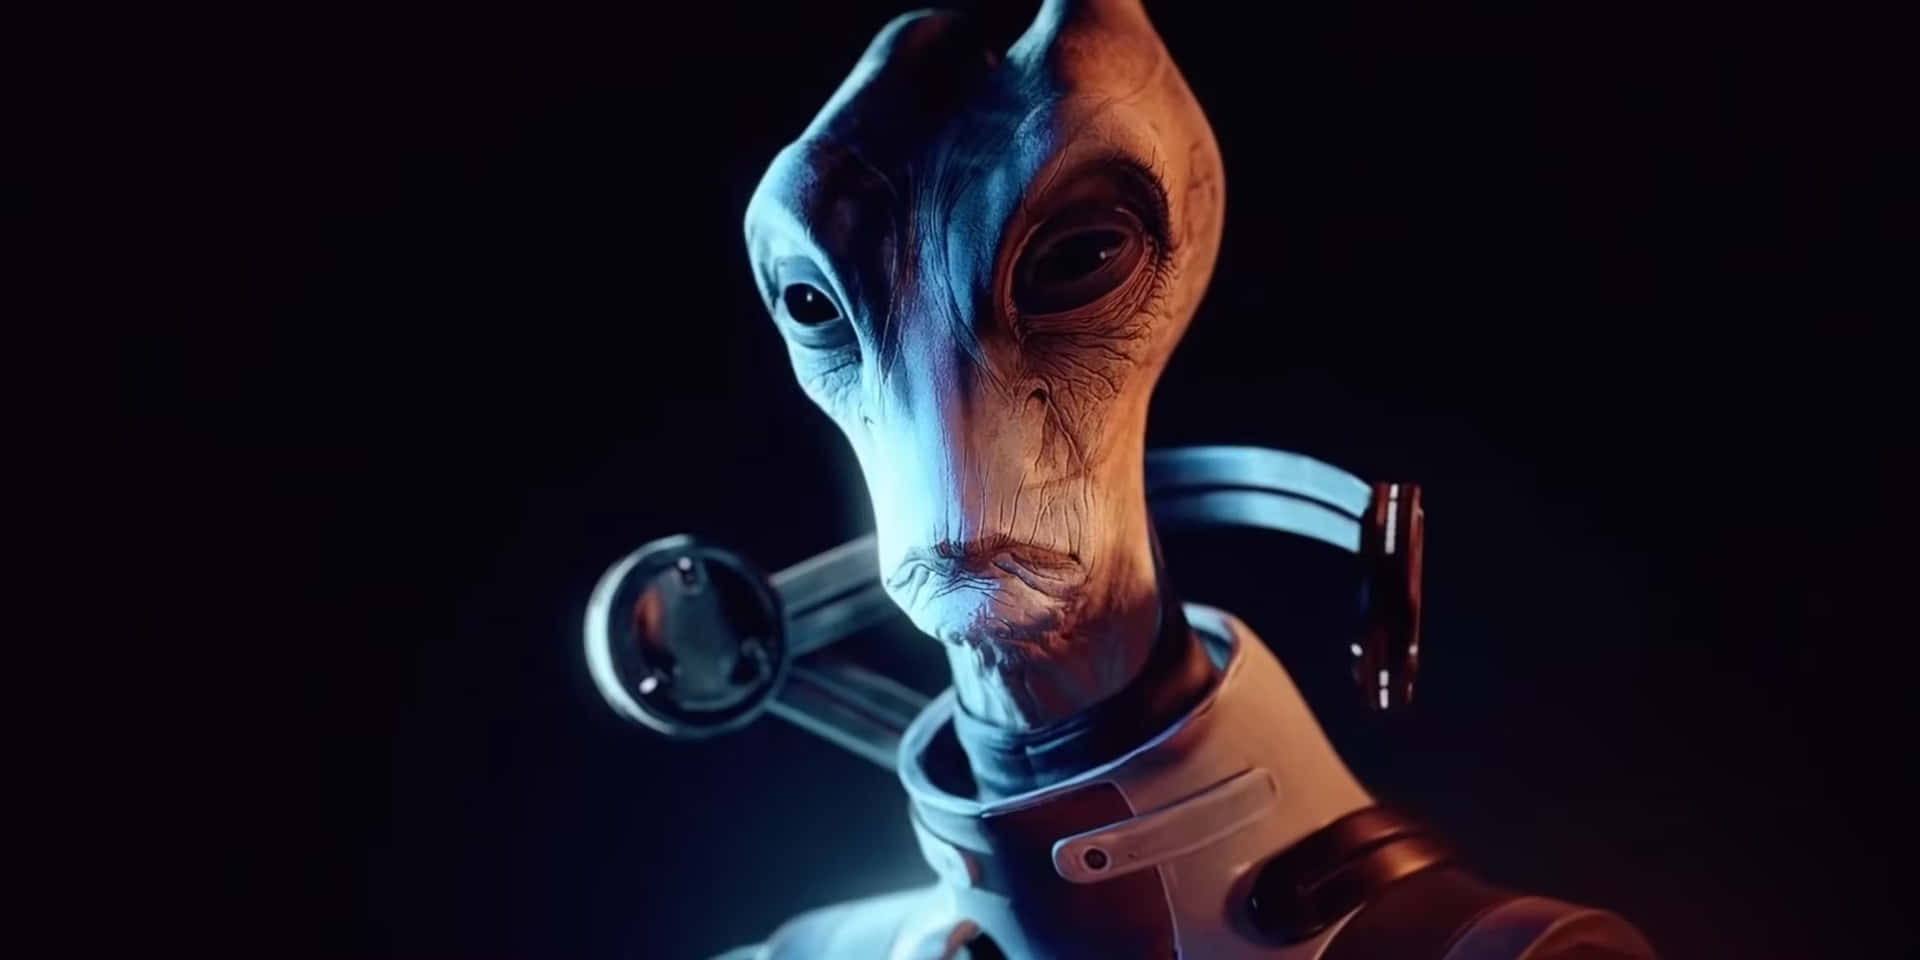 Mordin Solus, a wise Salarian scientist in action Wallpaper